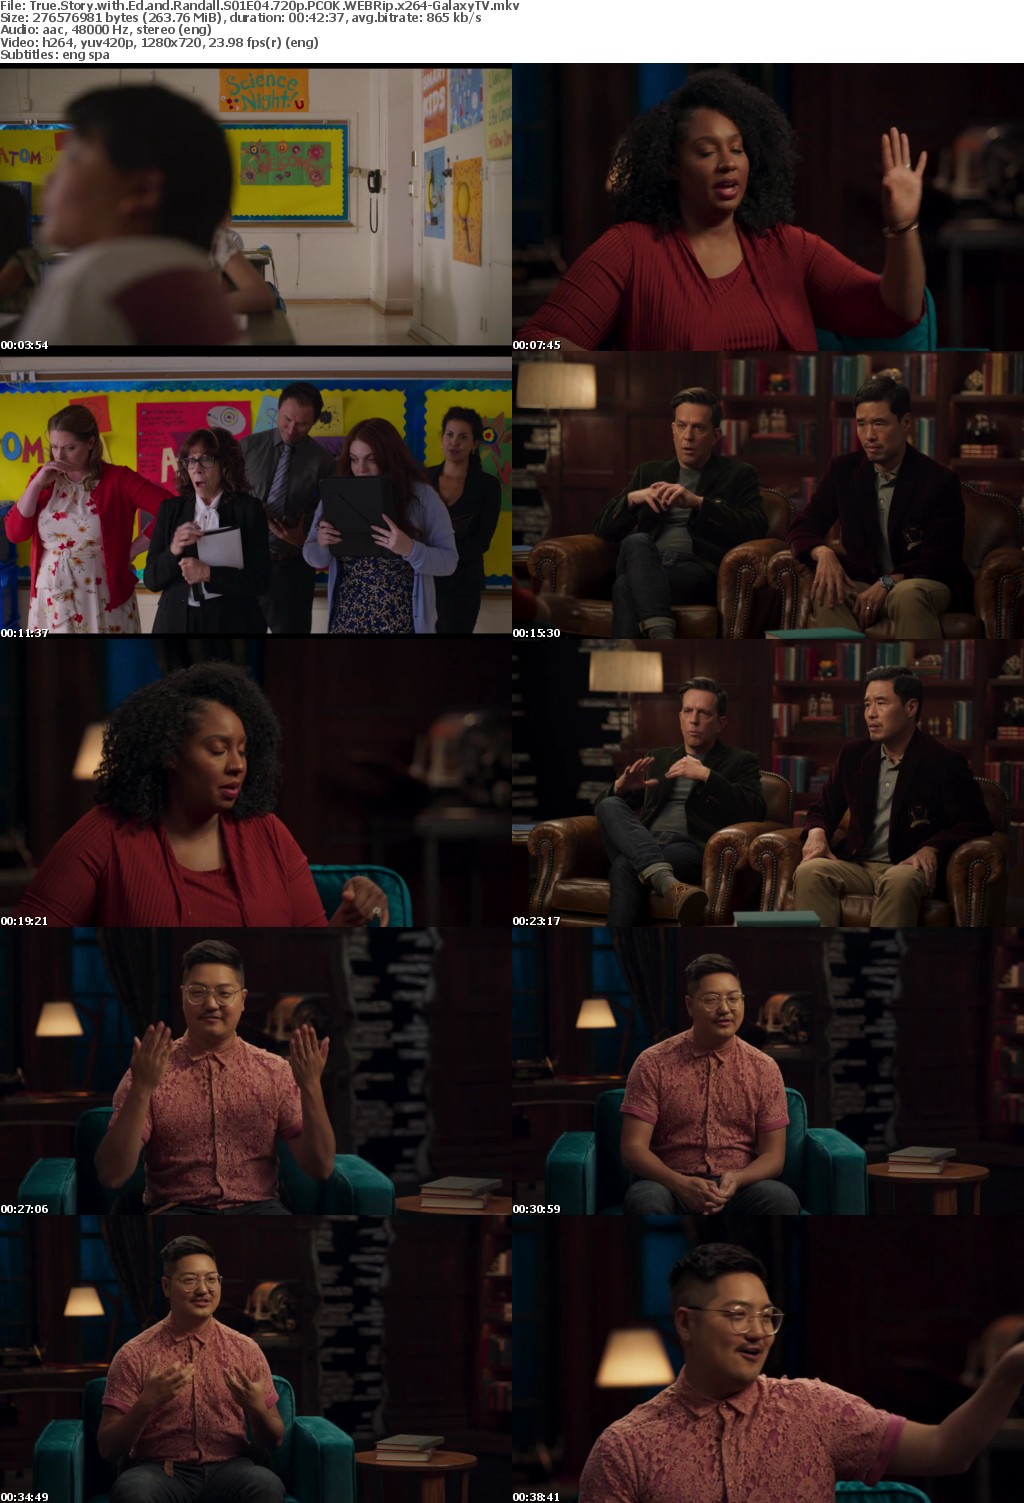 True Story with Ed and Randall S01 COMPLETE 720p PCOK WEBRip x264-GalaxyTV